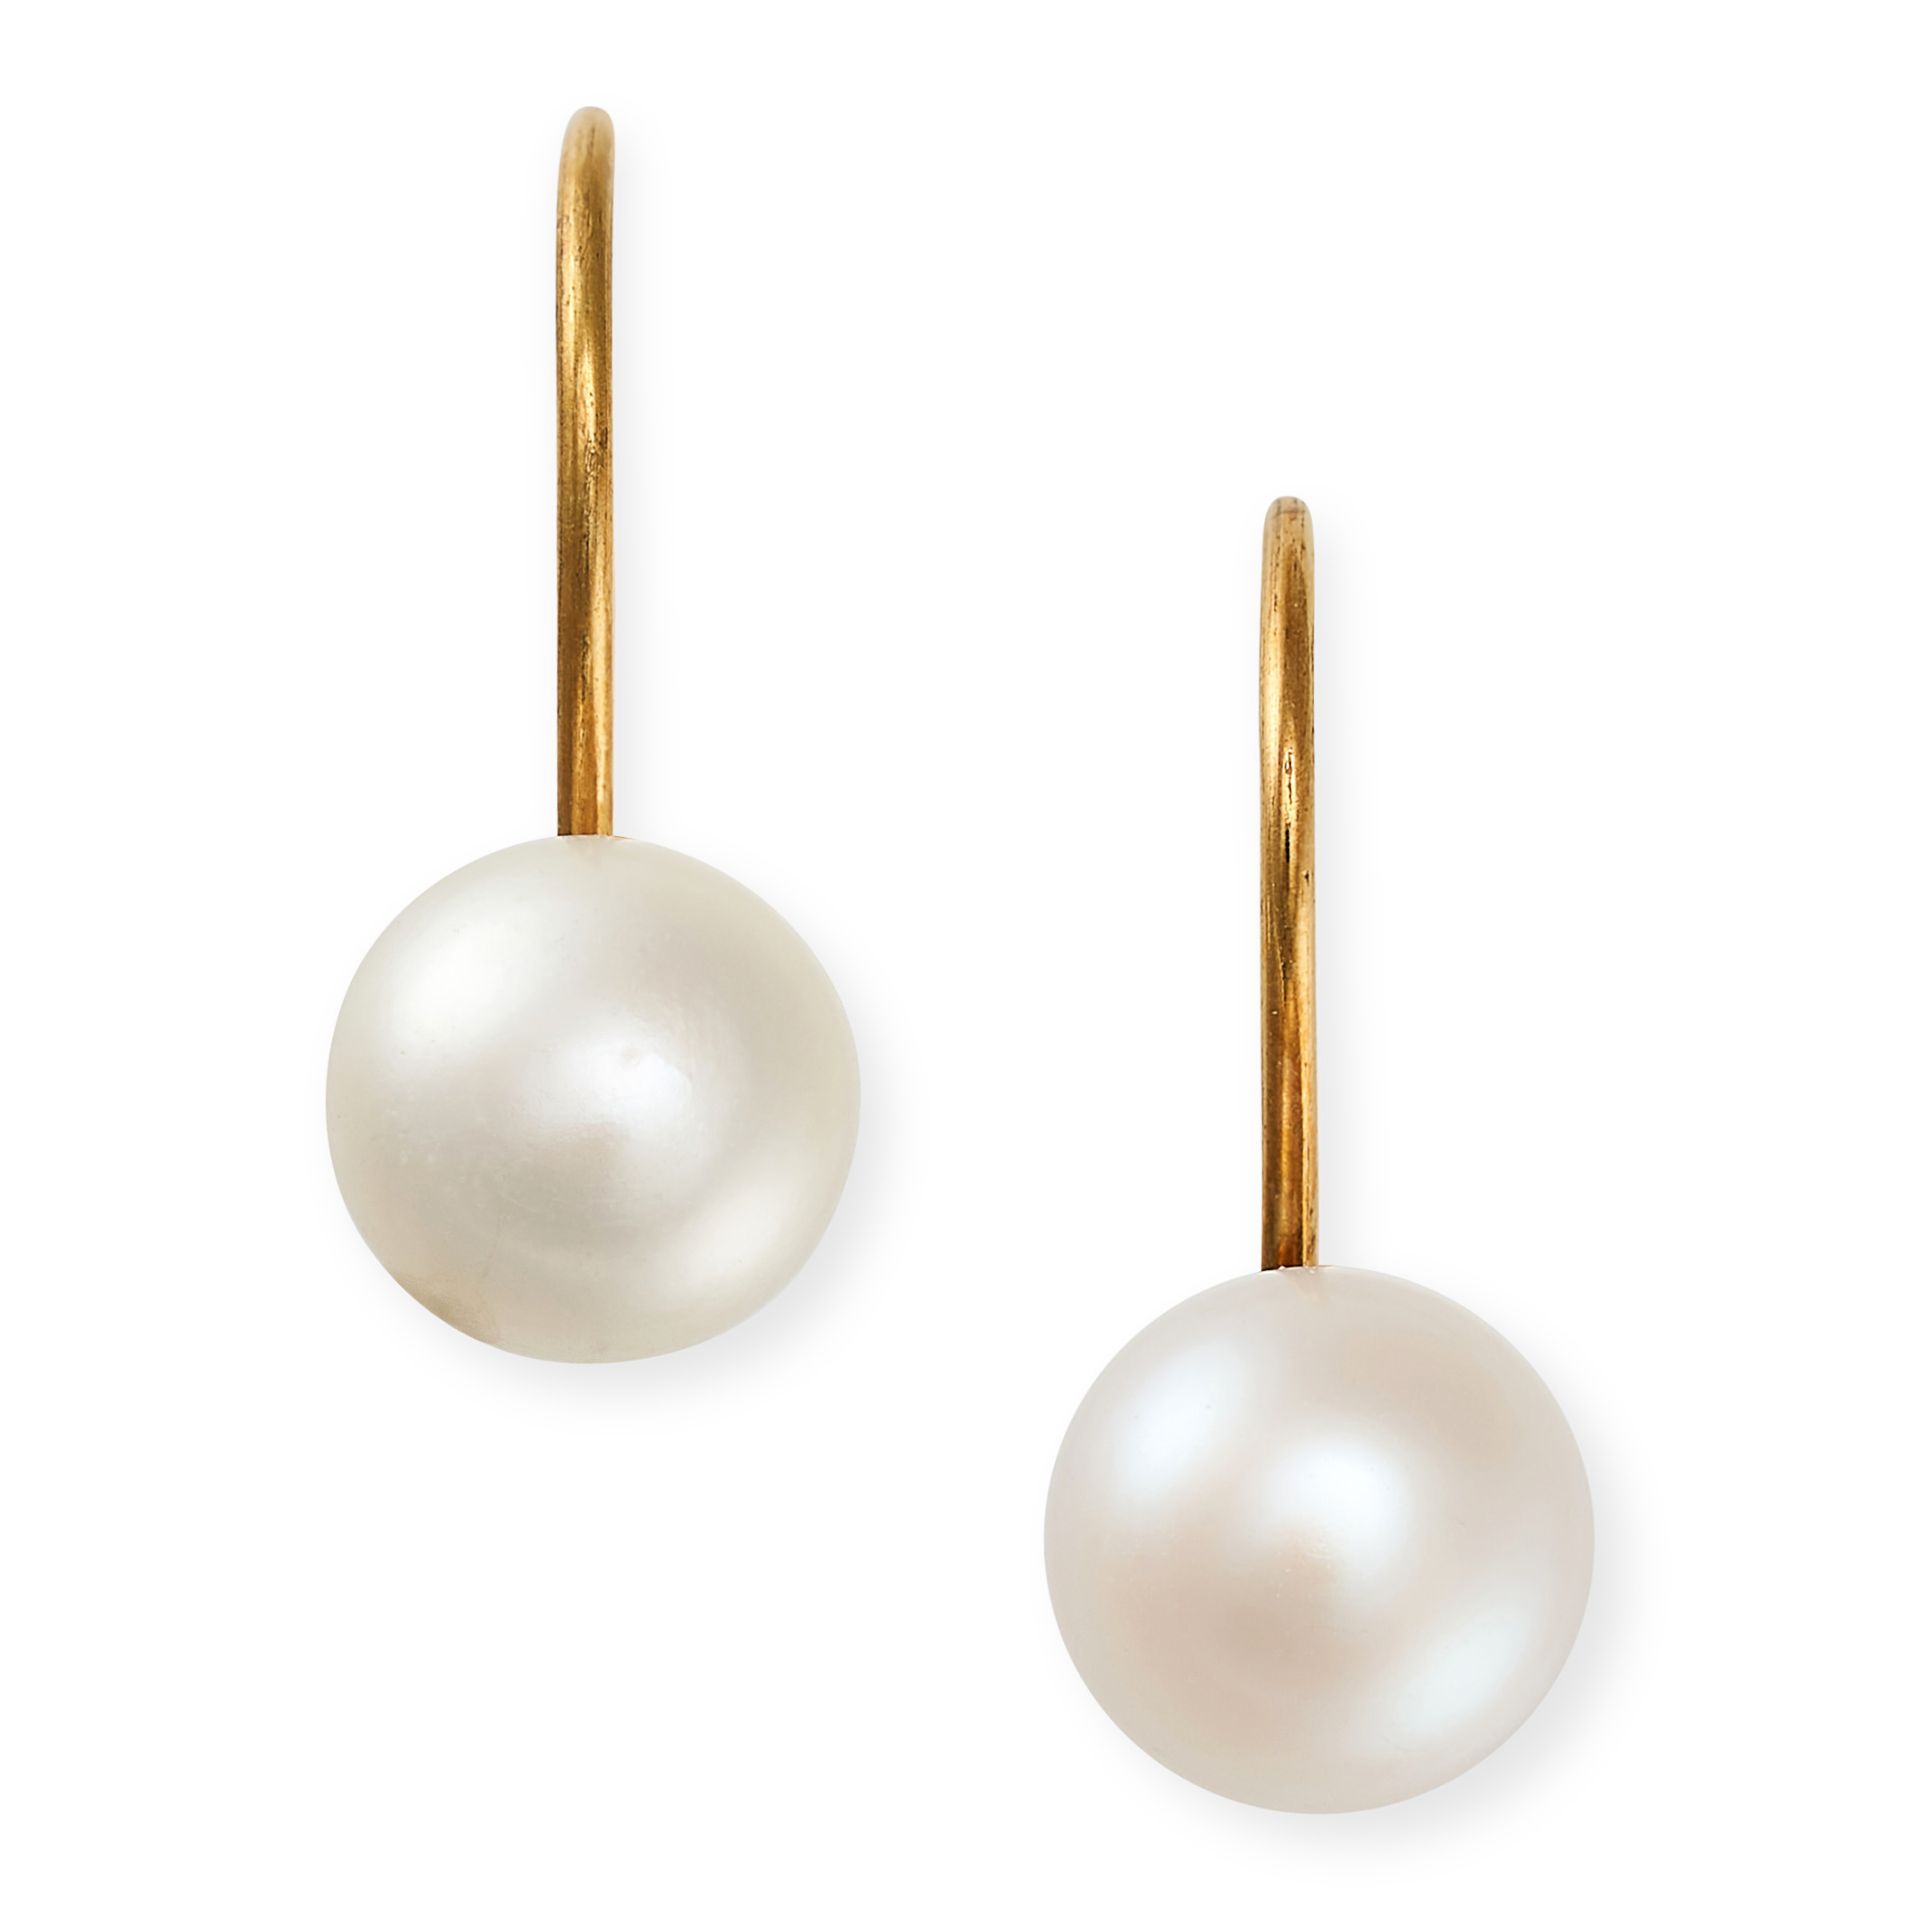 NO RESERVE - A PAIR OF PEARL EARRINGS in yellow gold, each comprising a French wire suspending a ...